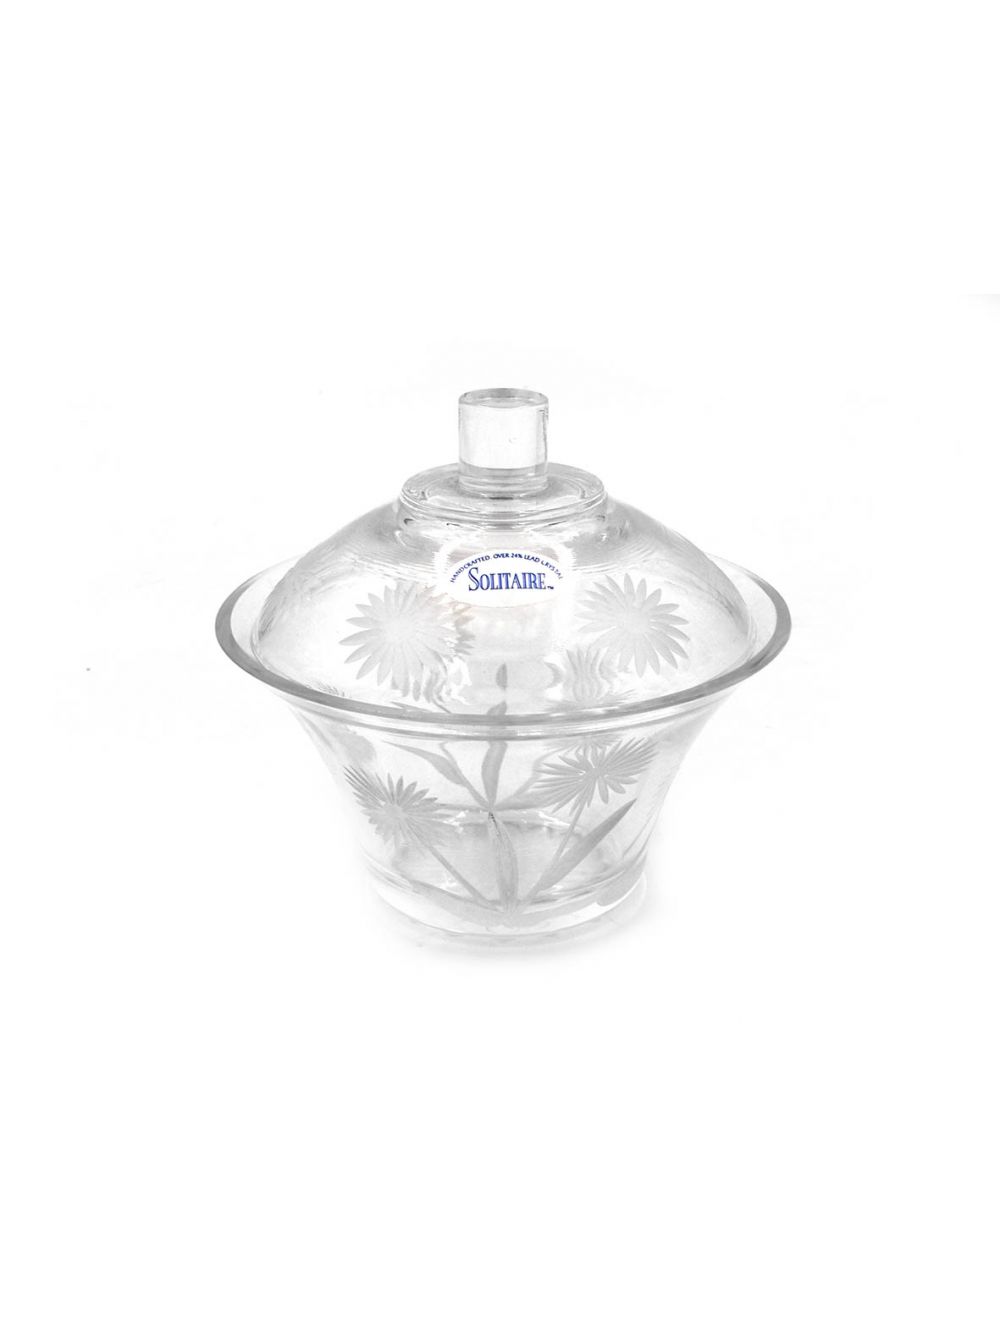 Solitaire Sugar Bowl With Cover Grasse